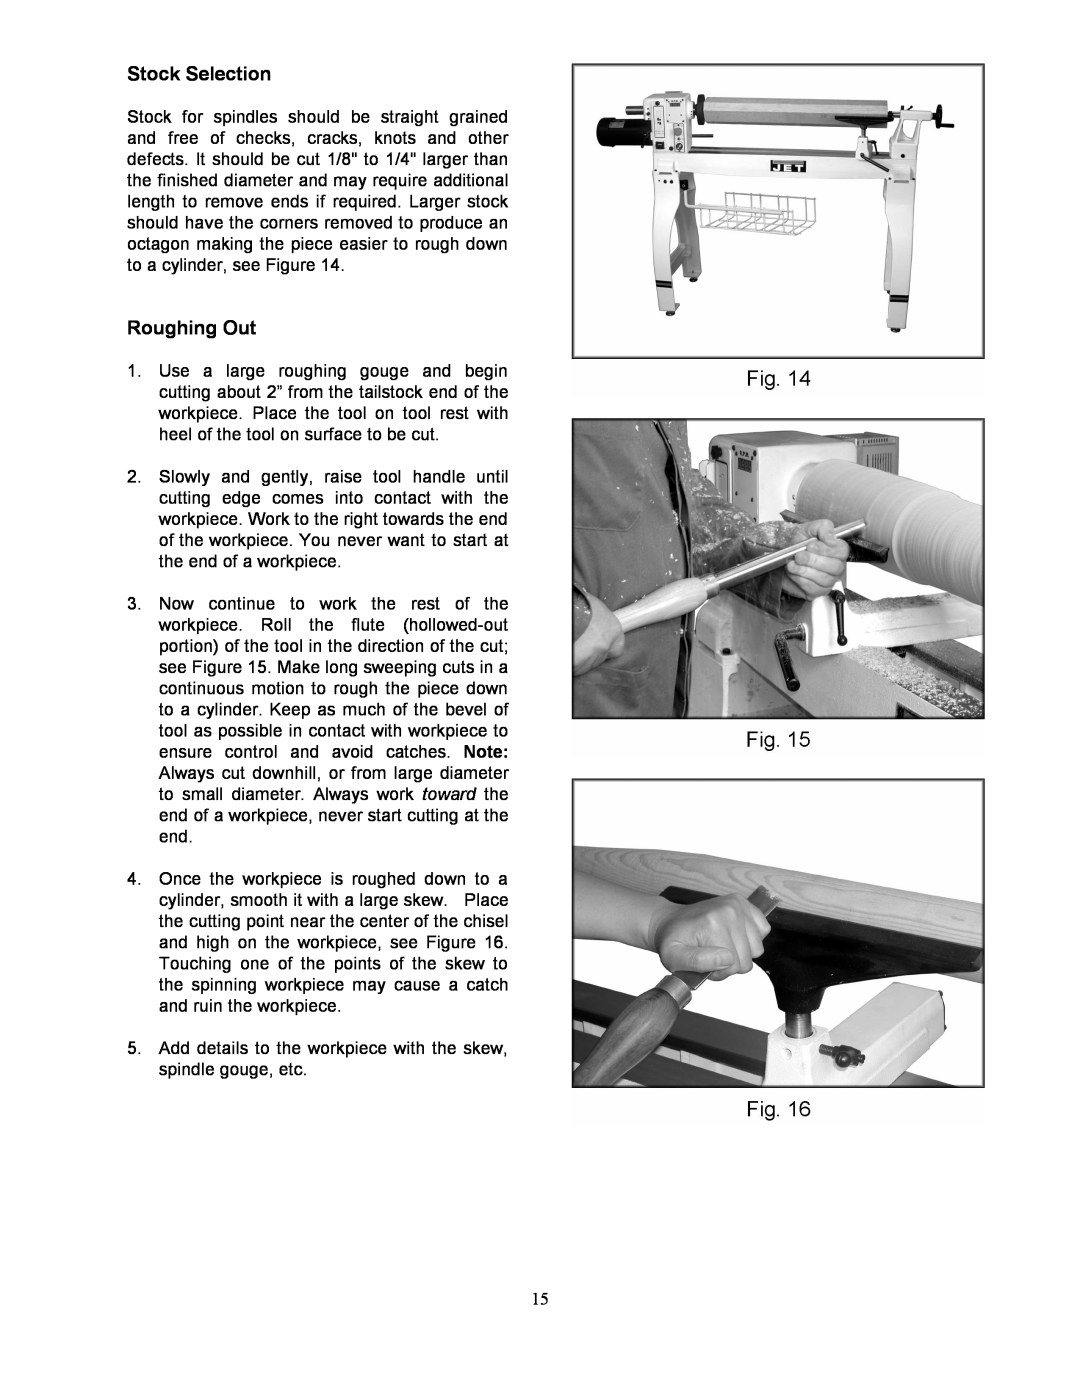 Jet Tools JWL-1642EVS-2 operating instructions Stock Selection, Roughing Out 